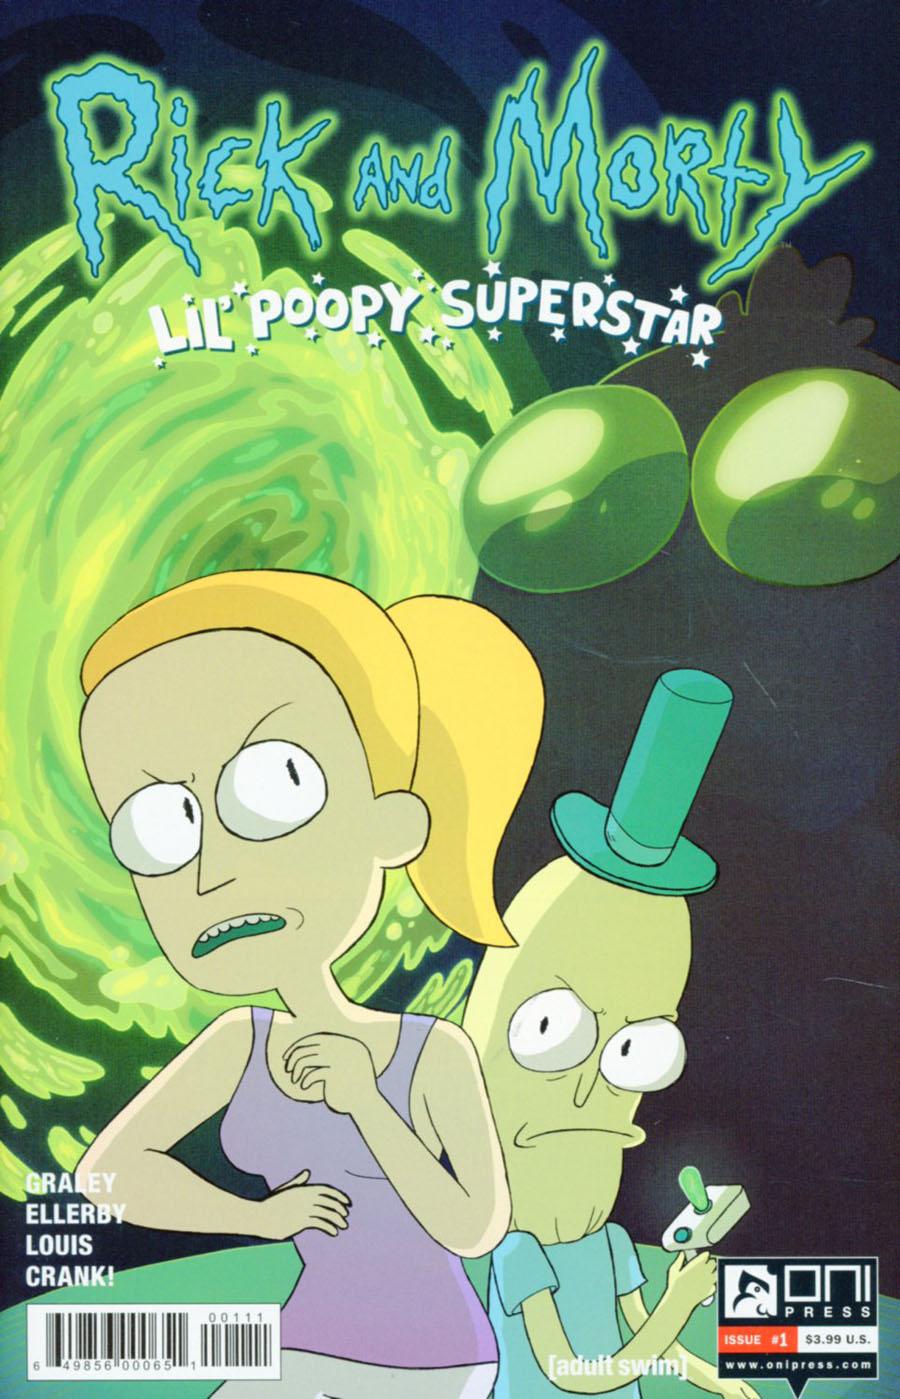 Rick And Morty Lil Poopy Superstar Vol. 1 #1